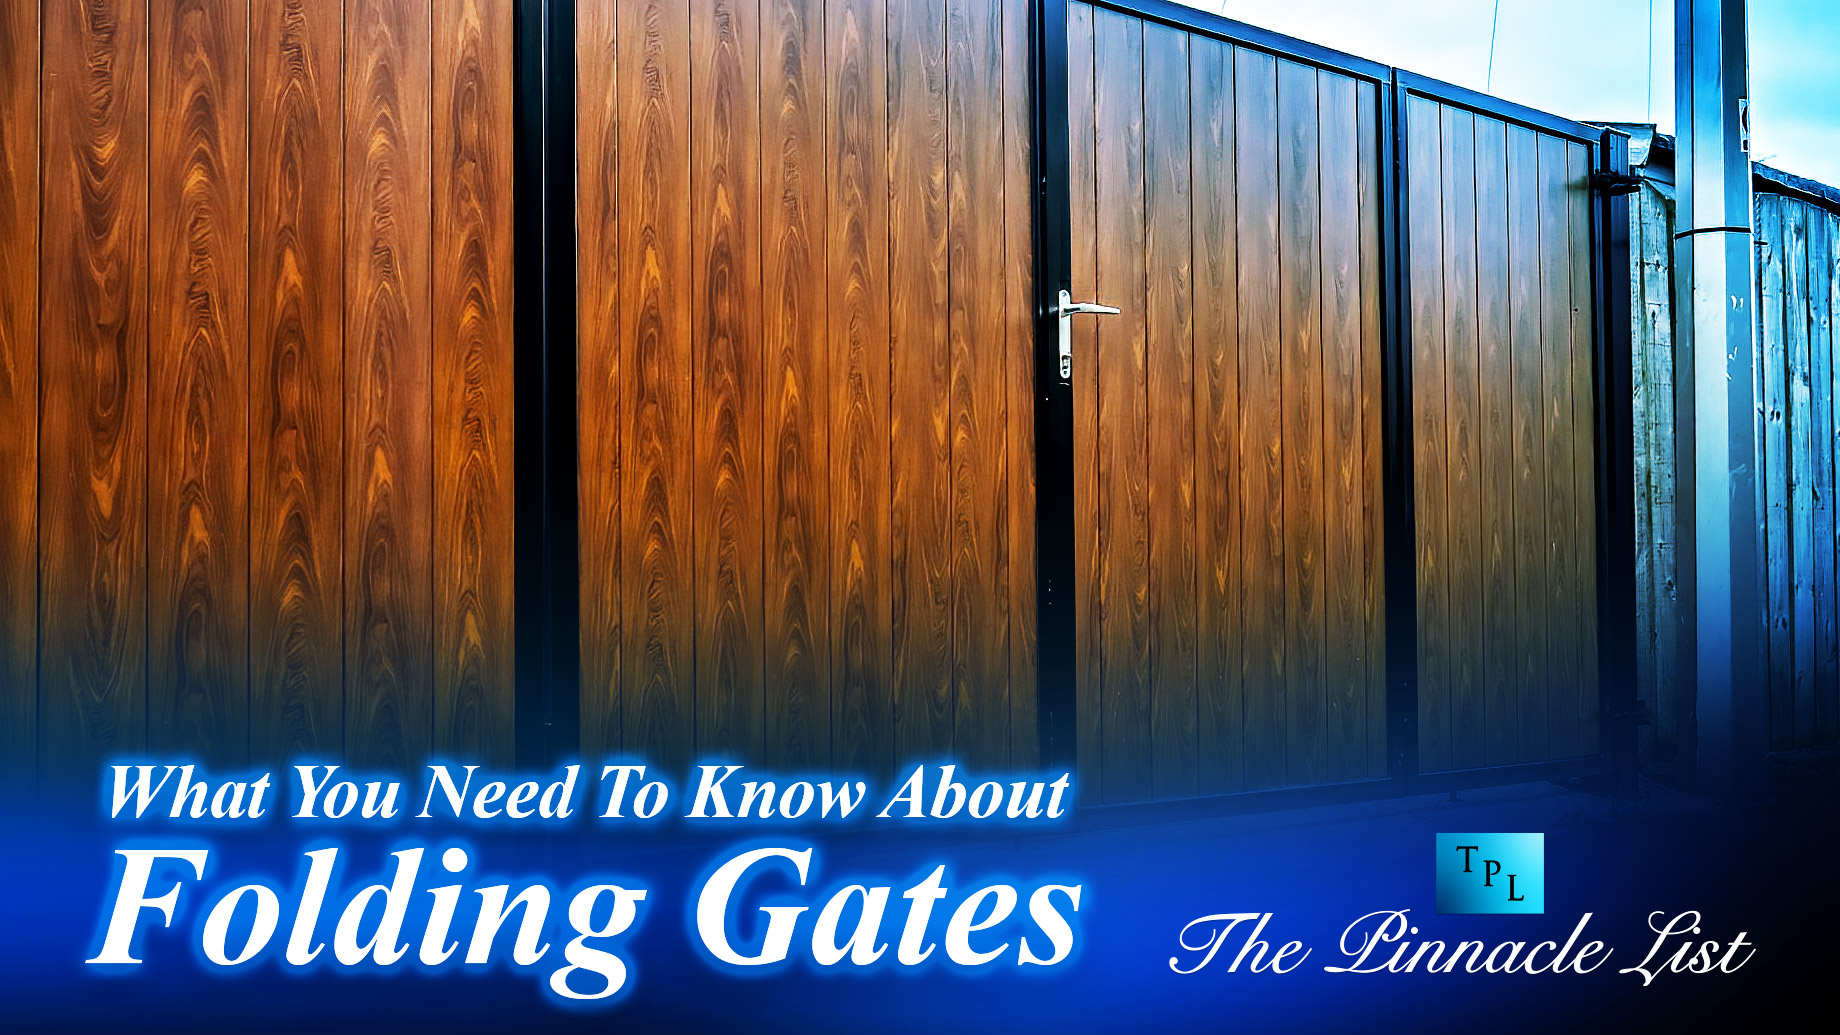 What You Need To Know About Folding Gates